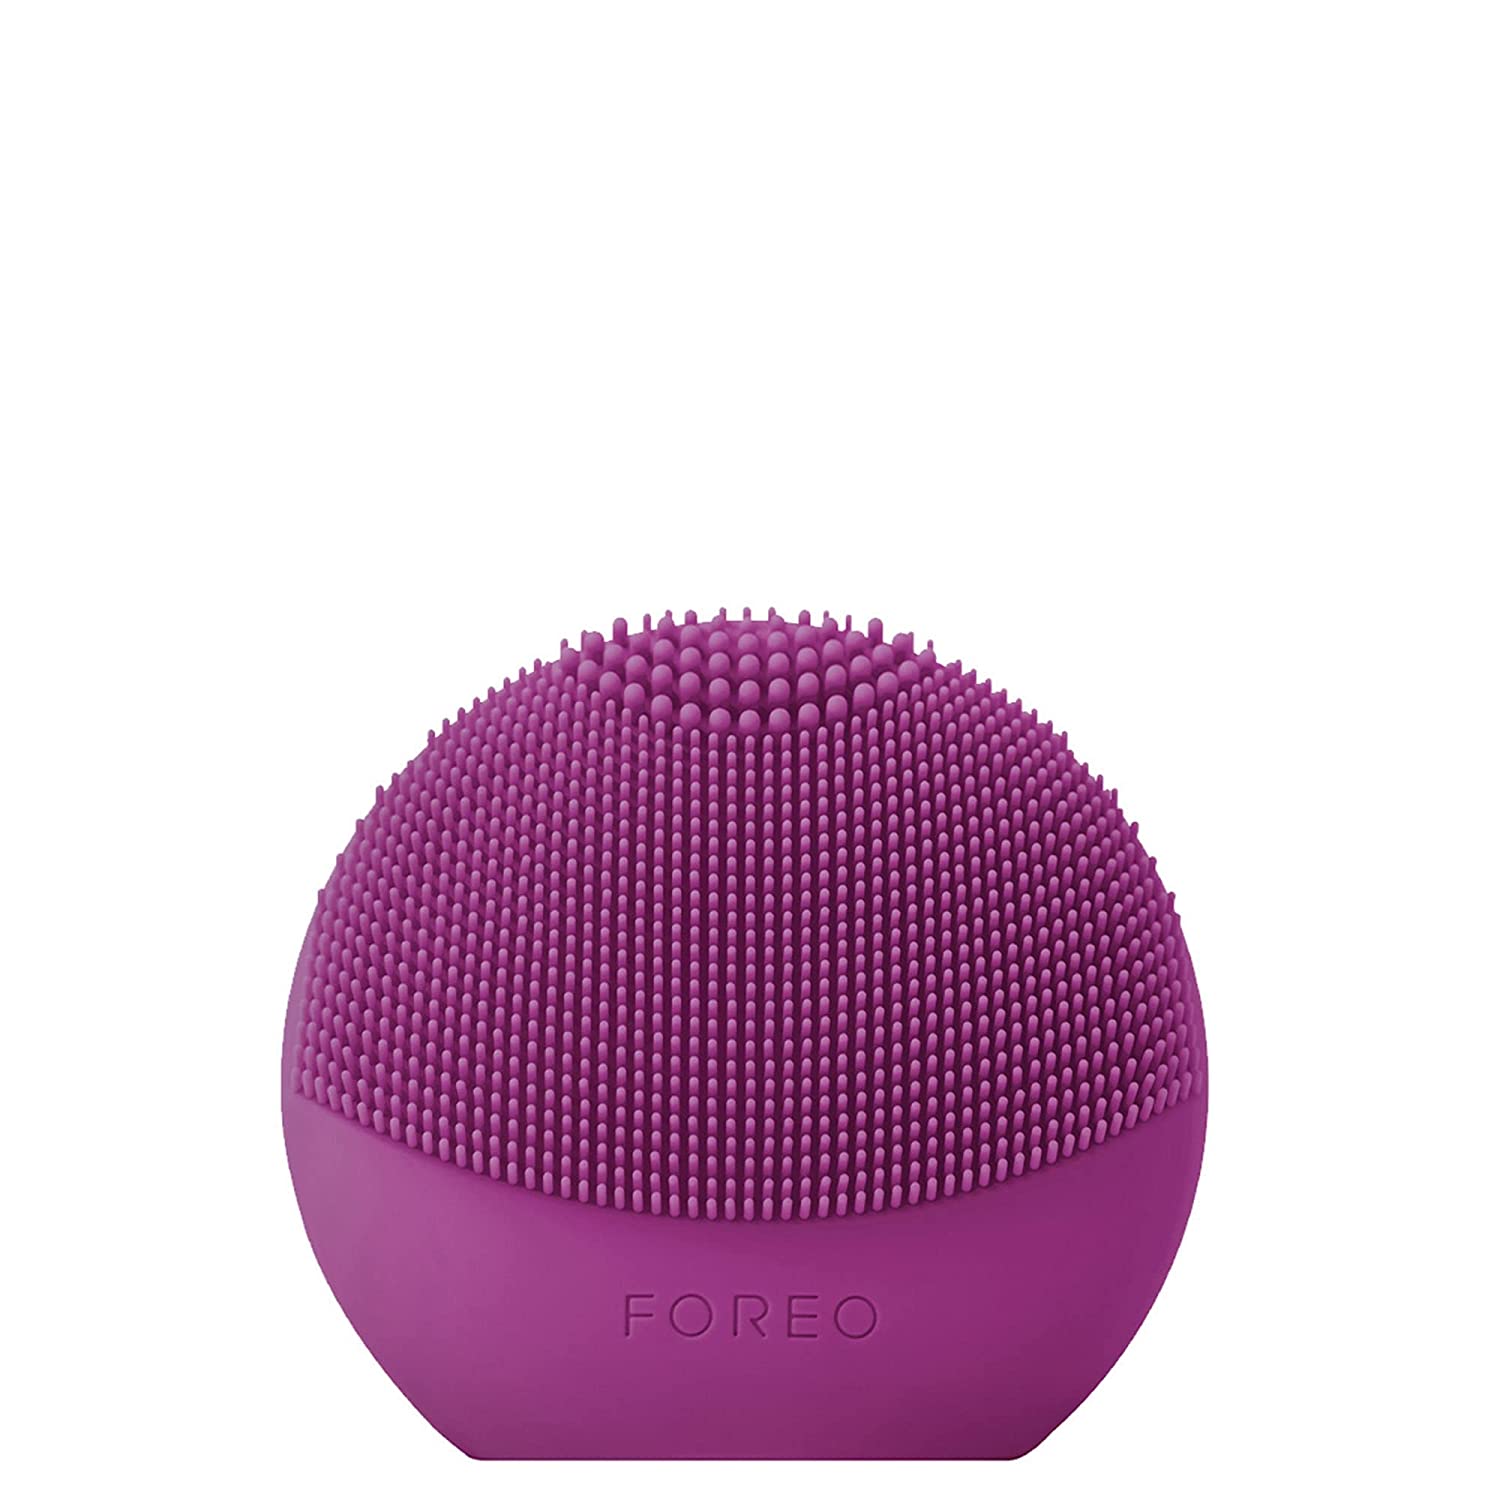 Foreo LUNA Smart Facial Cleansing Brush and Skin Analyzer-0